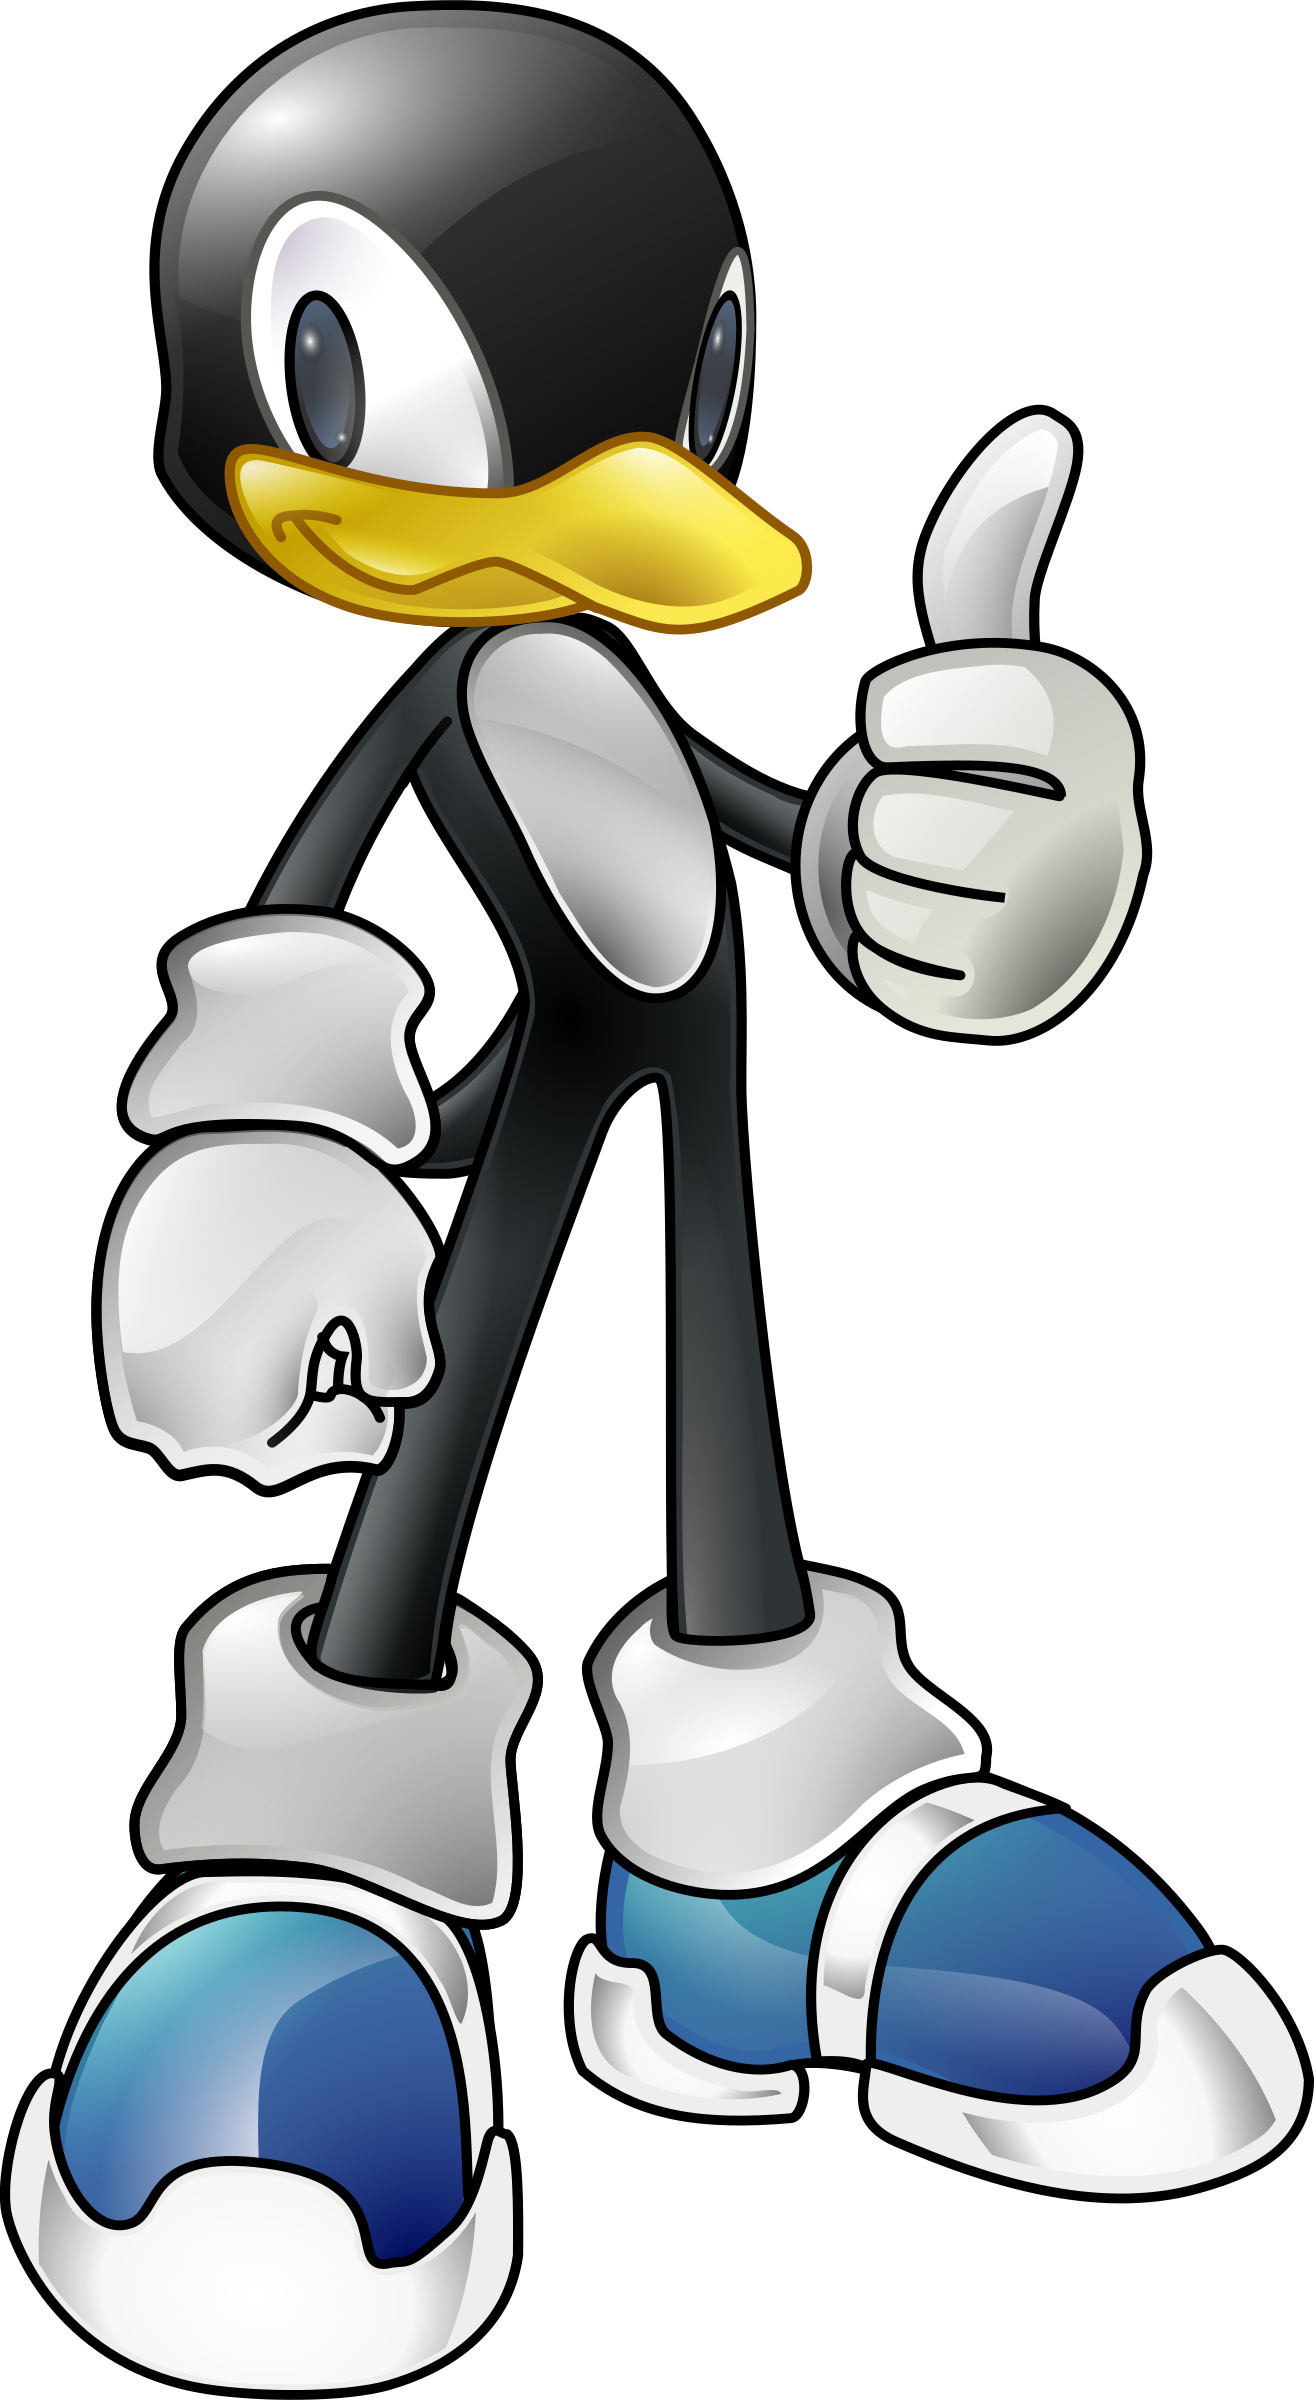 El-Sato-Tux-The-penguin-in-sonic-style.png